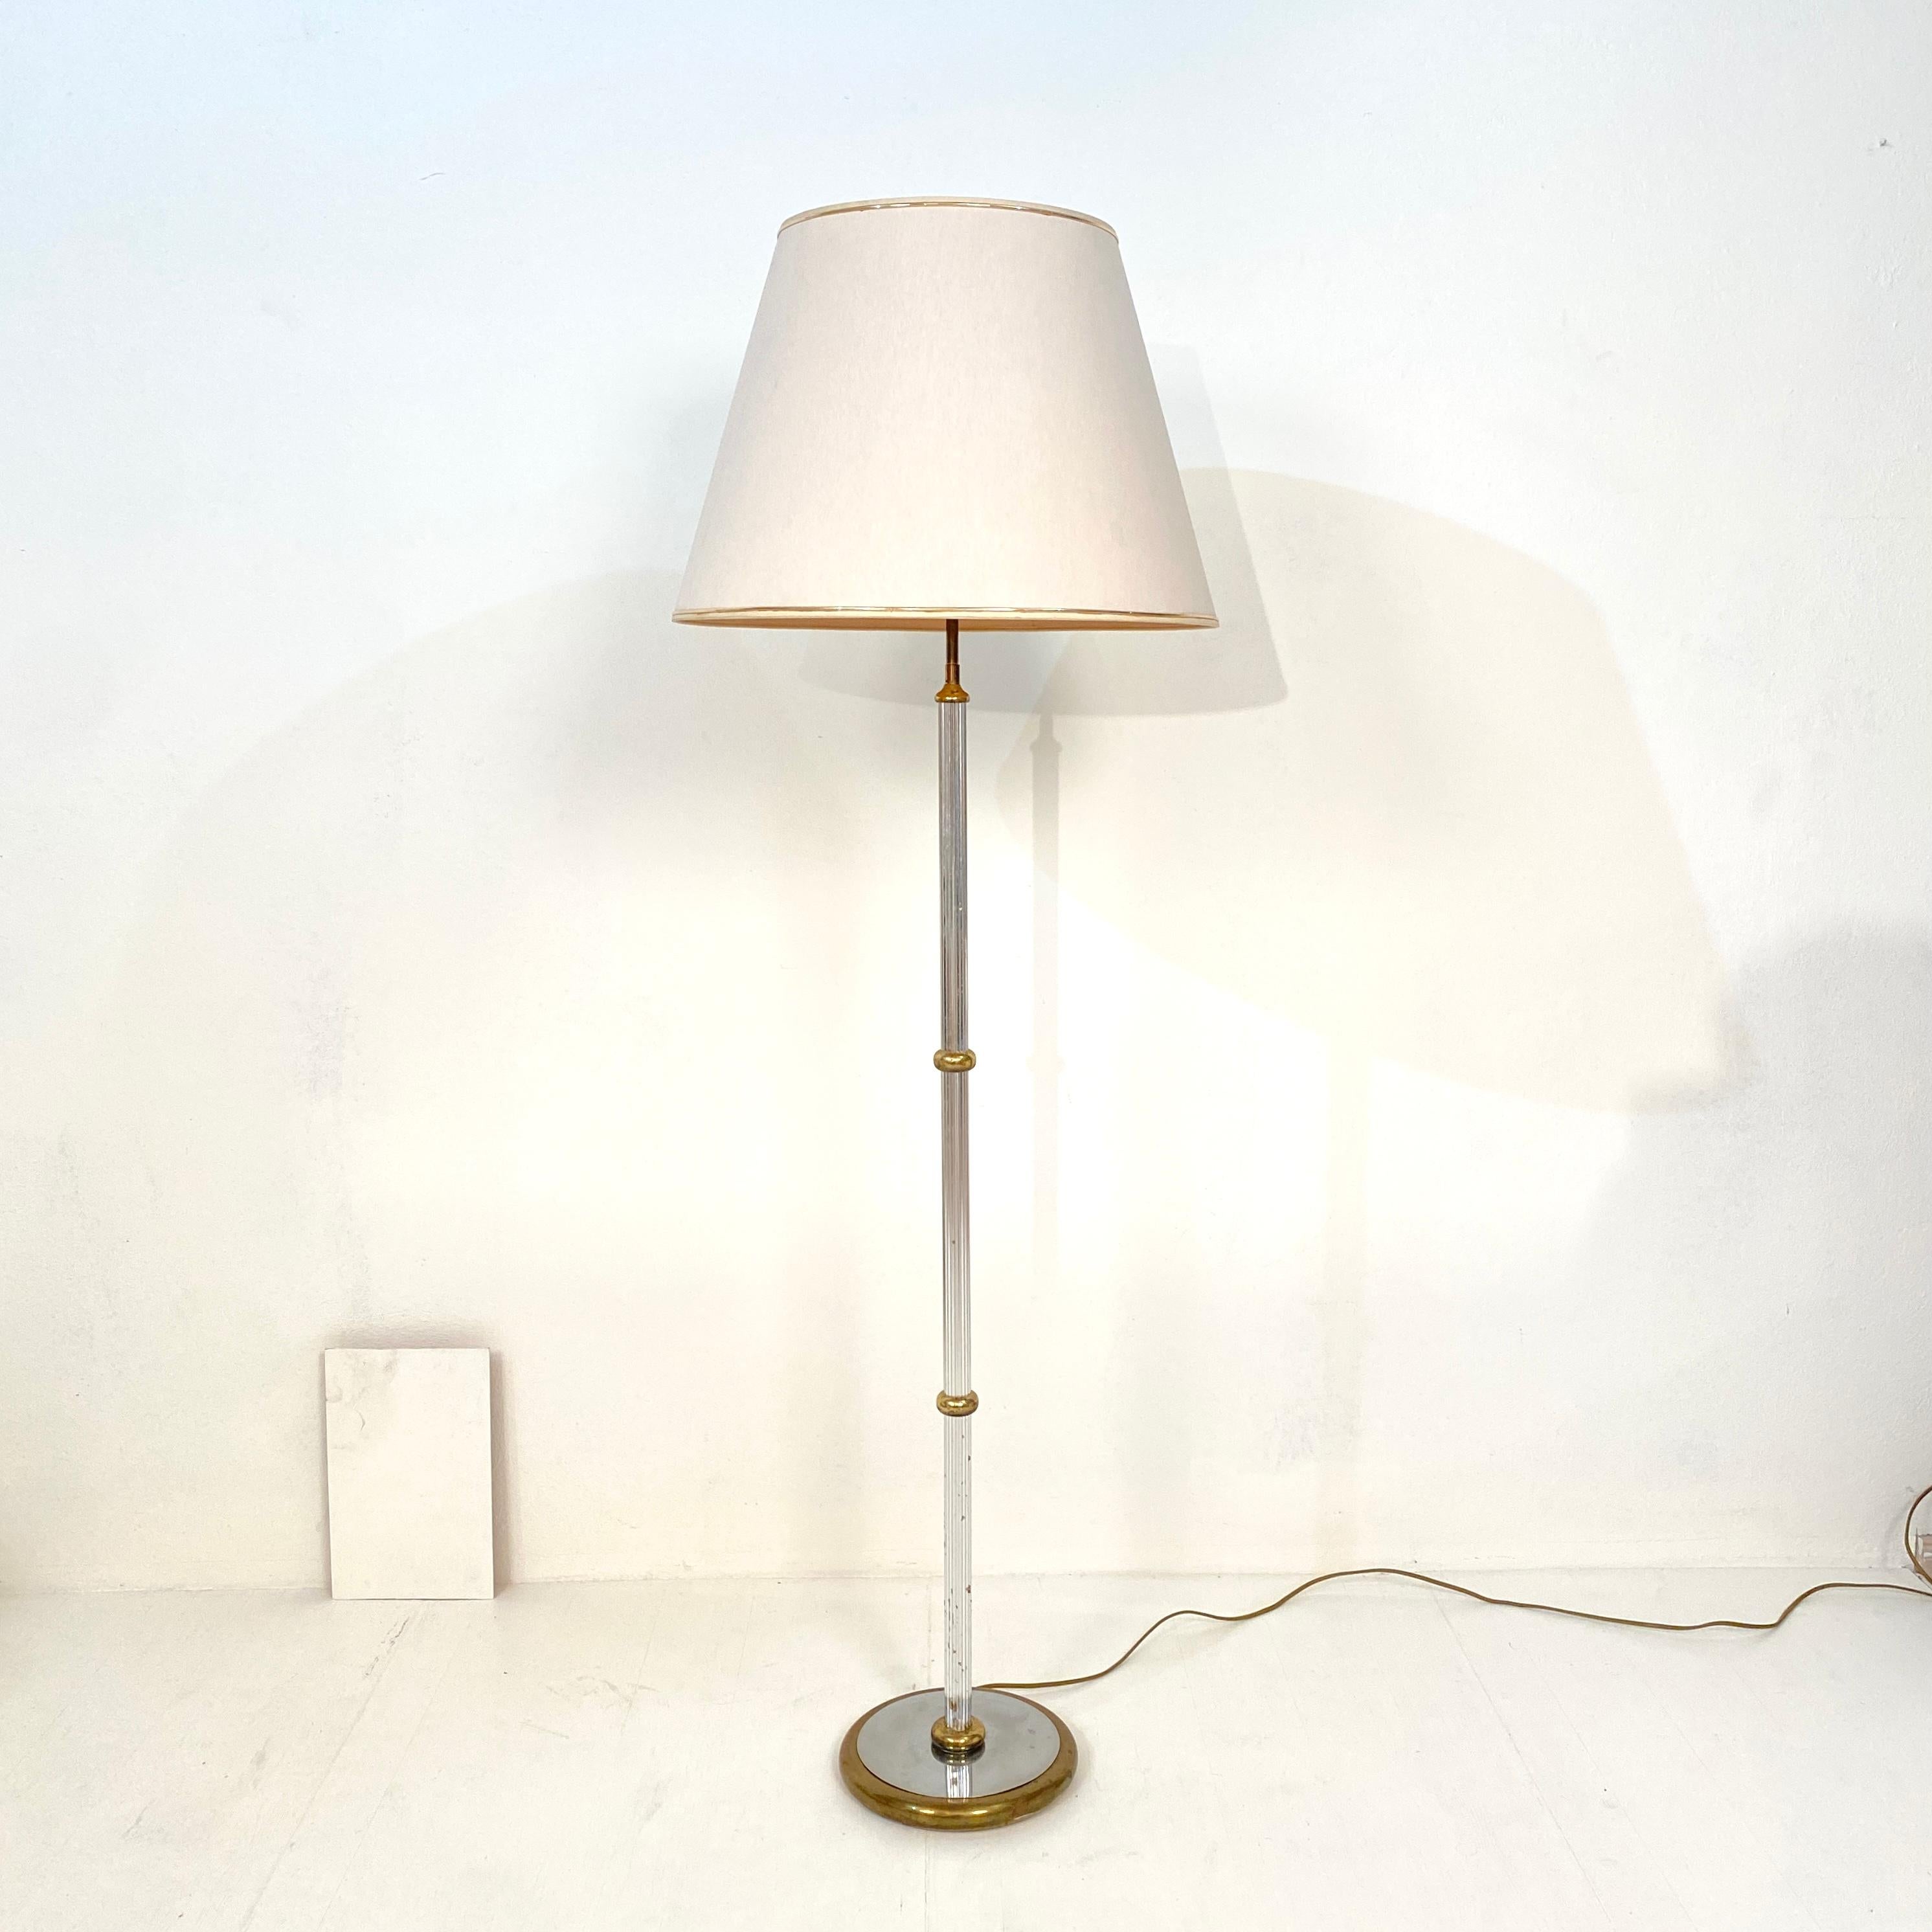 This midcentury floor lamp was made by Aro-Leuchte in Germany in the 1970s. It is mad out of chrome and brass. The original lamp shade is made out of fabric.
A unique piece which is a great eye-catcher for your antique, modern, Space Age or